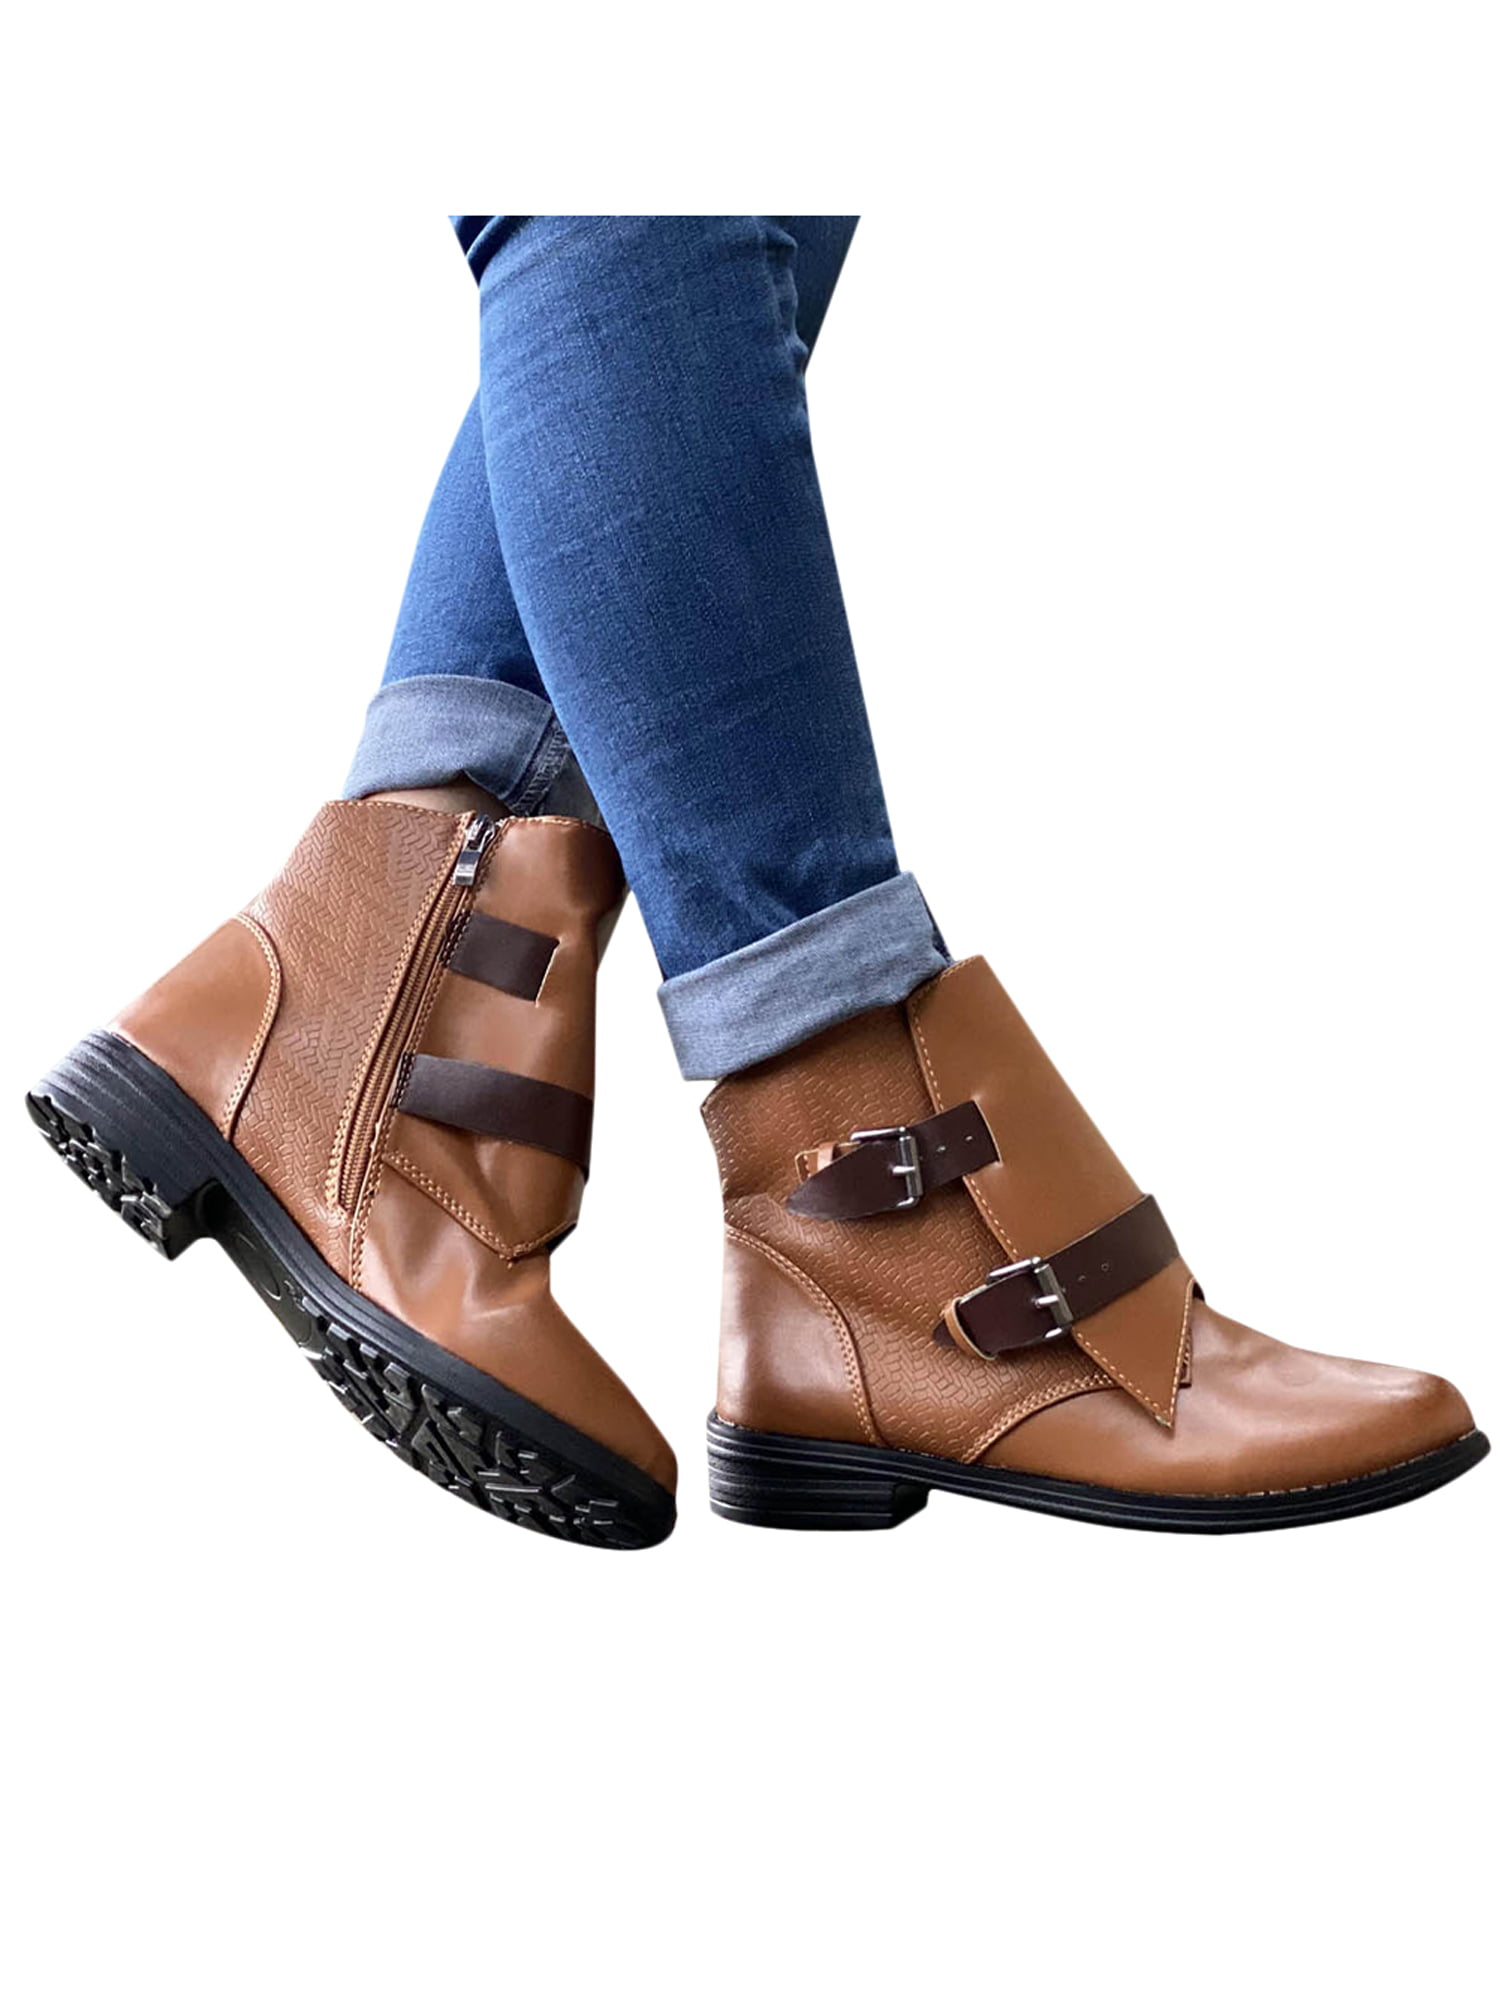 Womens Lace up Round toe Low Block Heel Ankle Boots Casual Winter Warm Shoes NEW